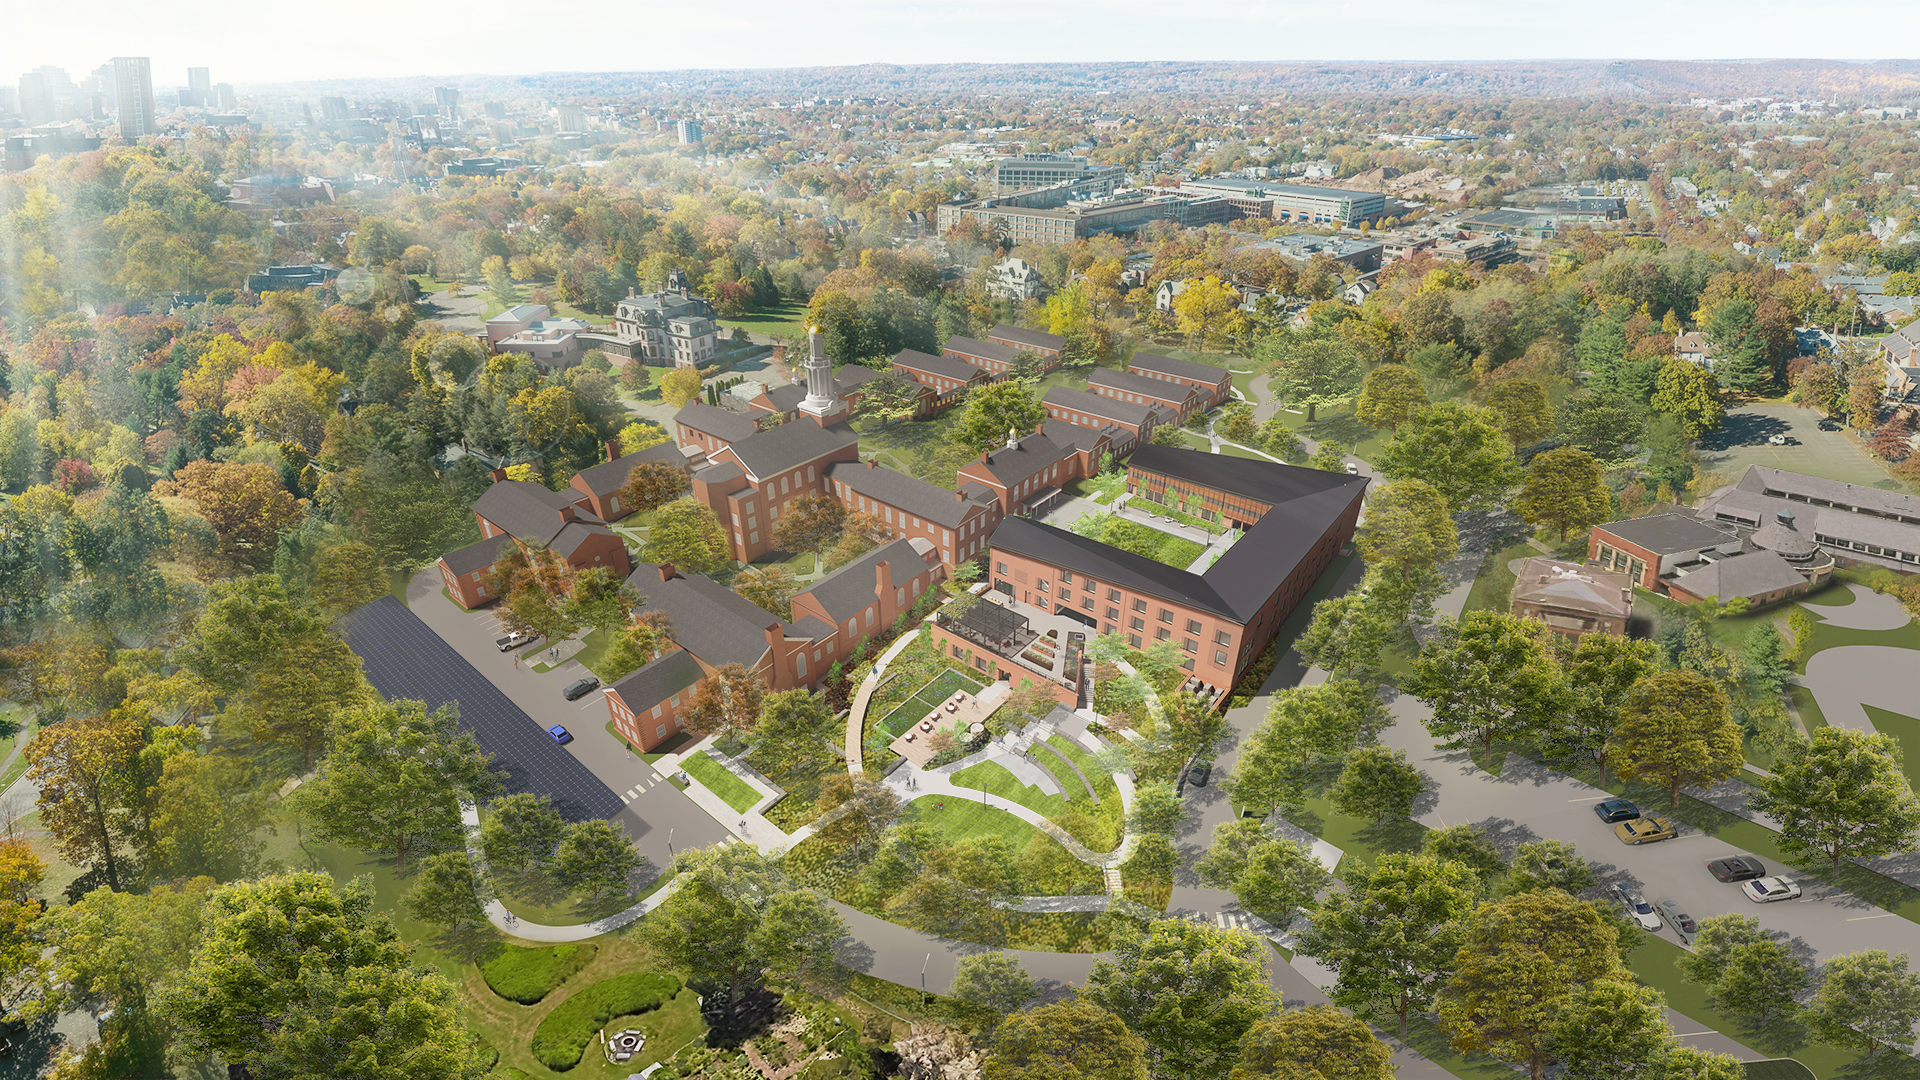 Yale University breaks ground on the nation's largest Living Building student housing complex